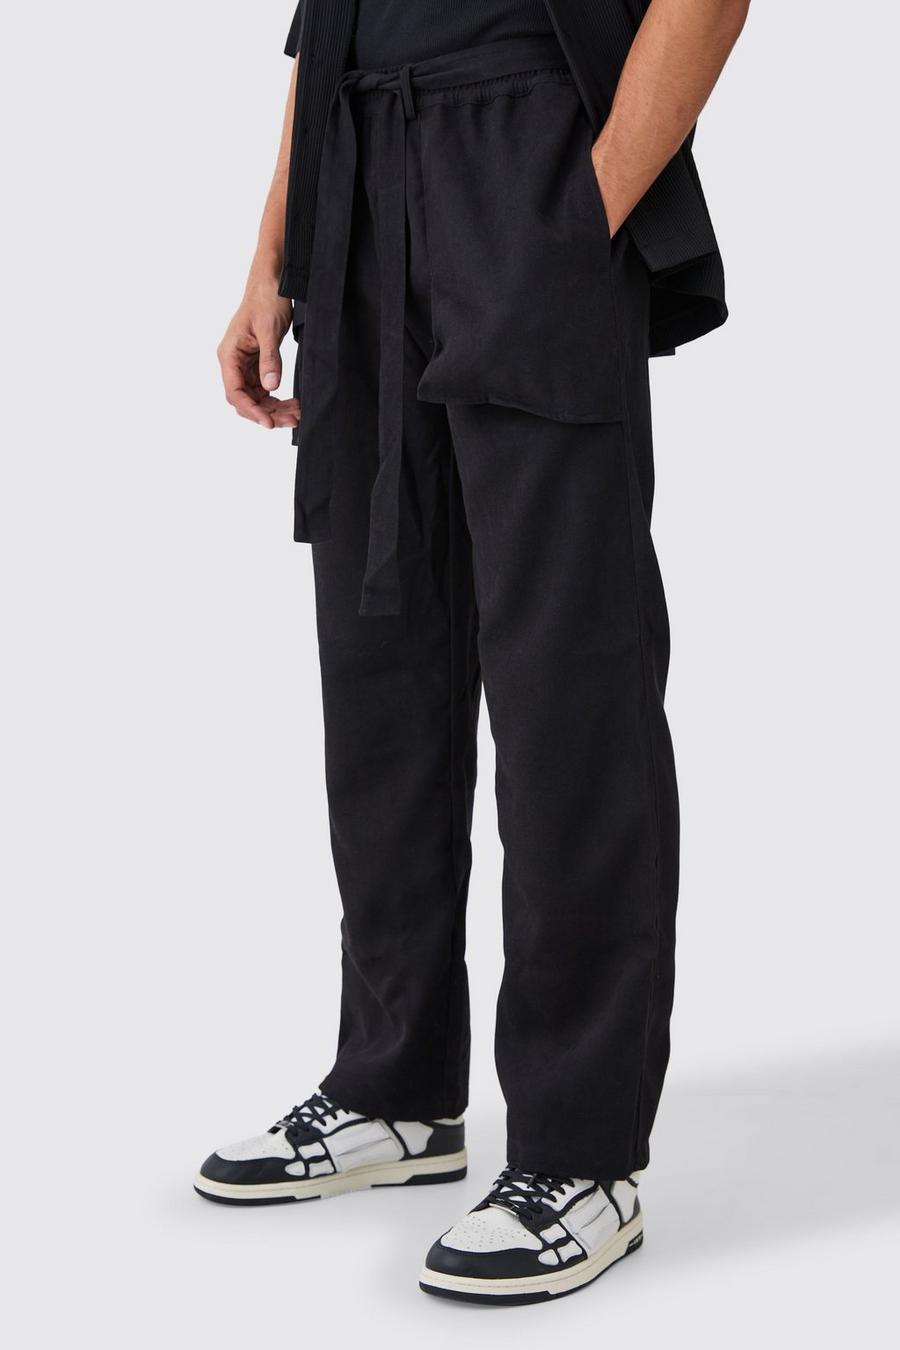 Black Elasticated Waist Peached Relaxed Fit Trouser